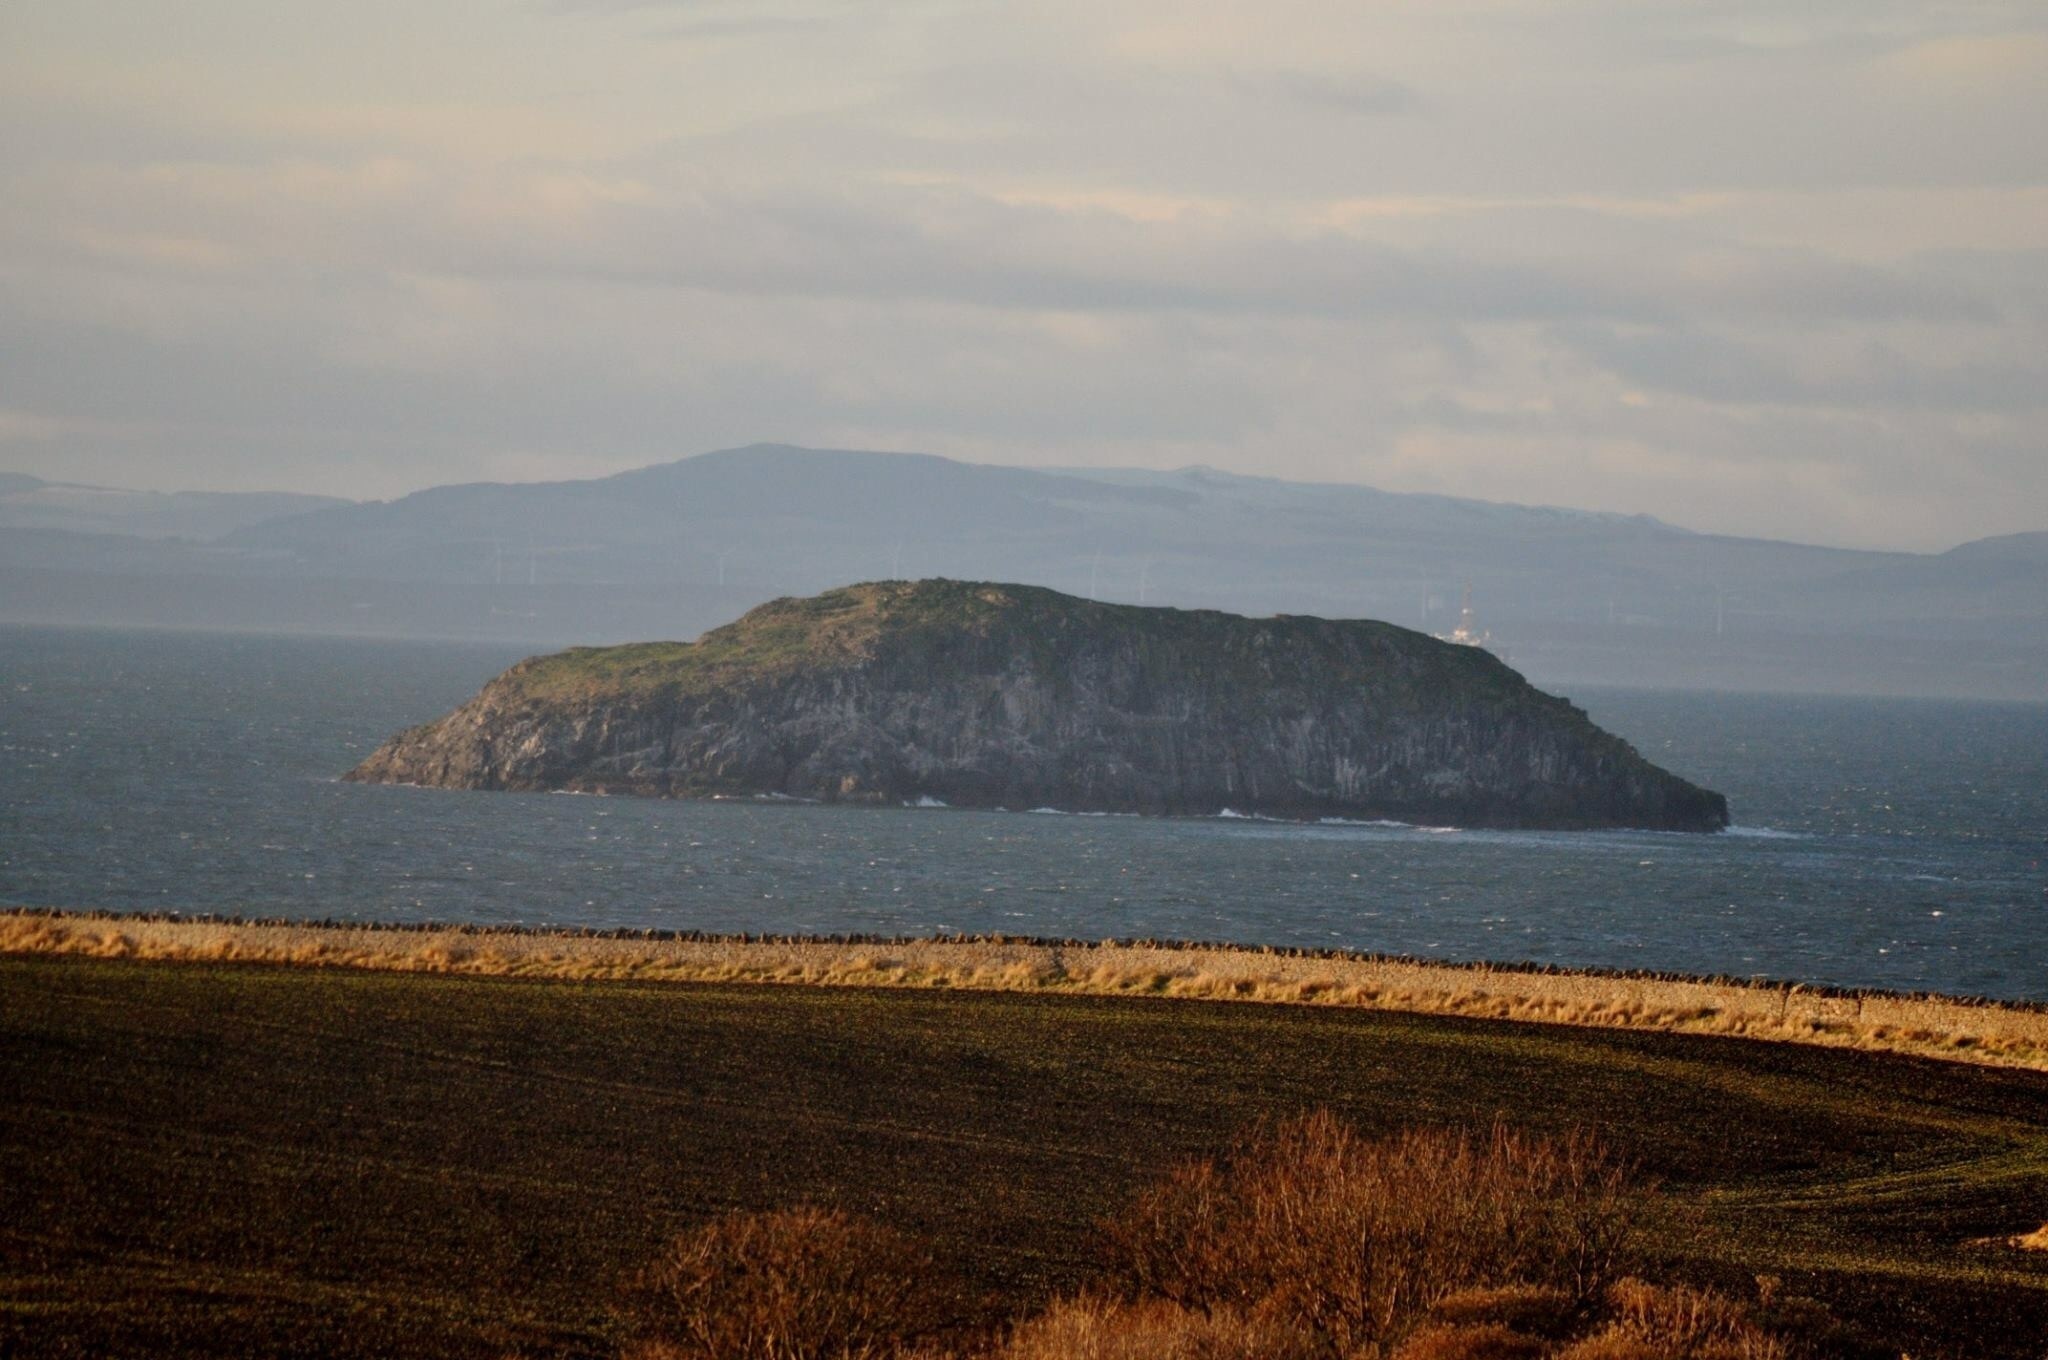 Craigleith.

Another of the islands in the Firth of Forth, famous for its puffin breeding colonies.